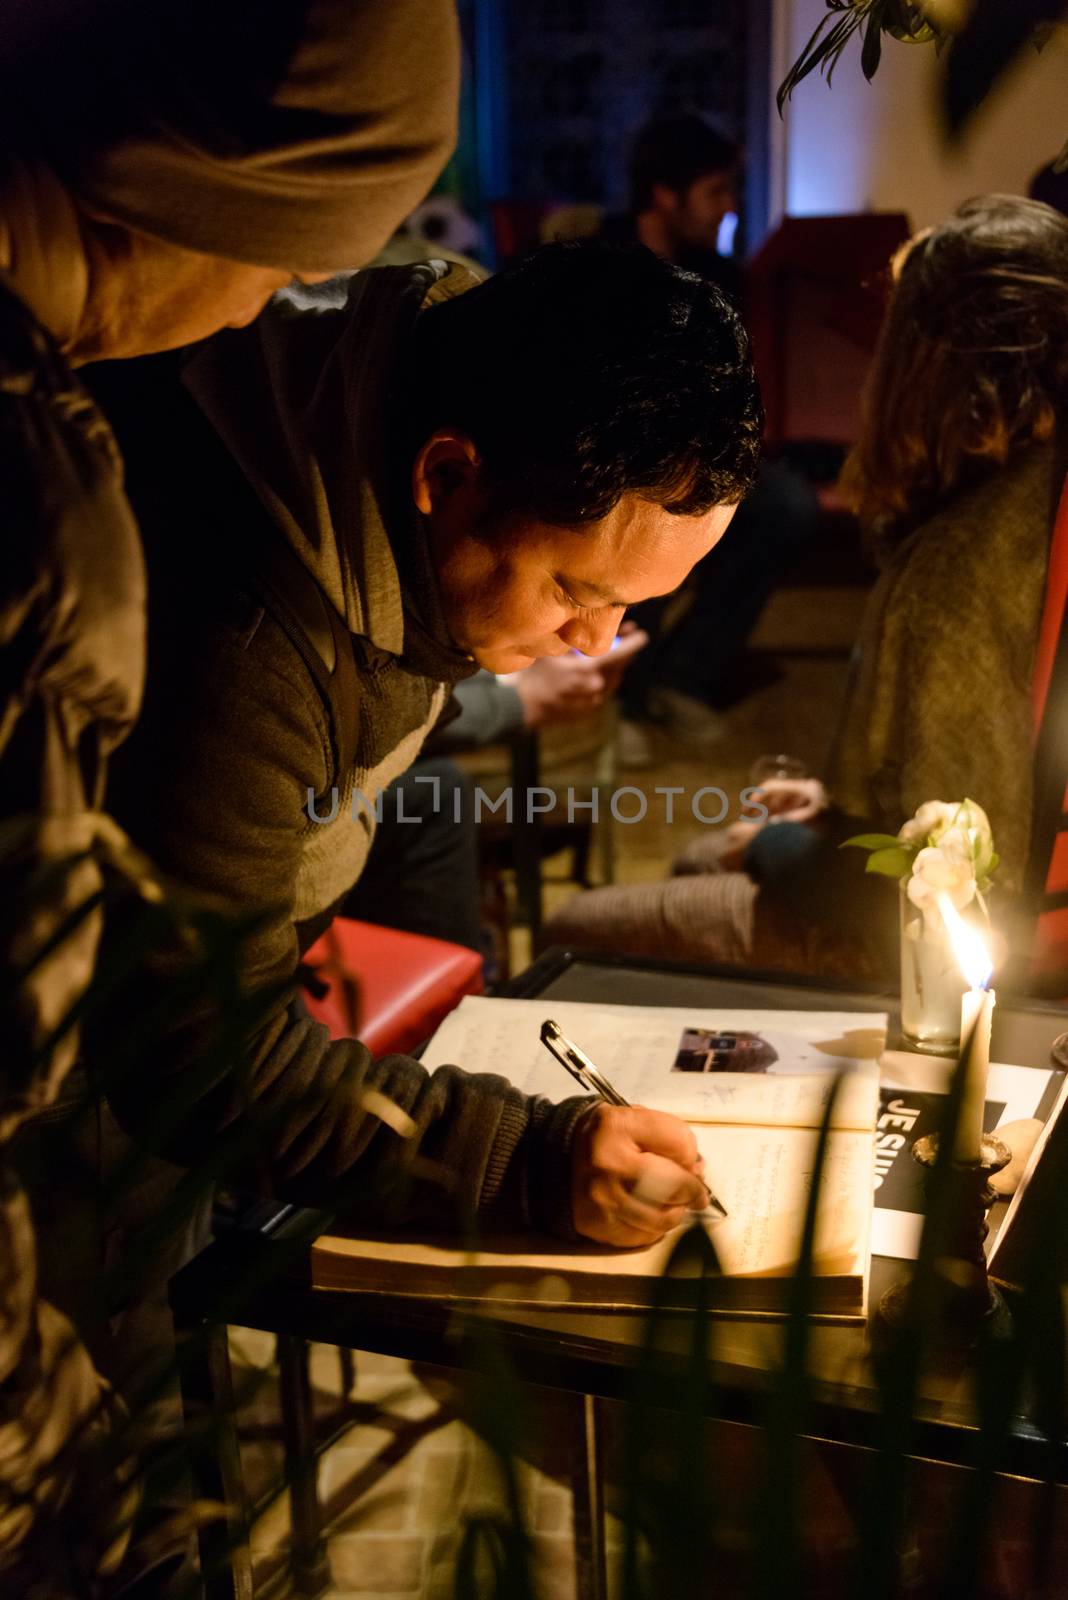 KATHMANDU, NEPAL - JANUARY 11, 2015: Man signing the condolences book at  the Cafe des Arts gathering in tribute to the victims of the terrorist attacks in Paris.